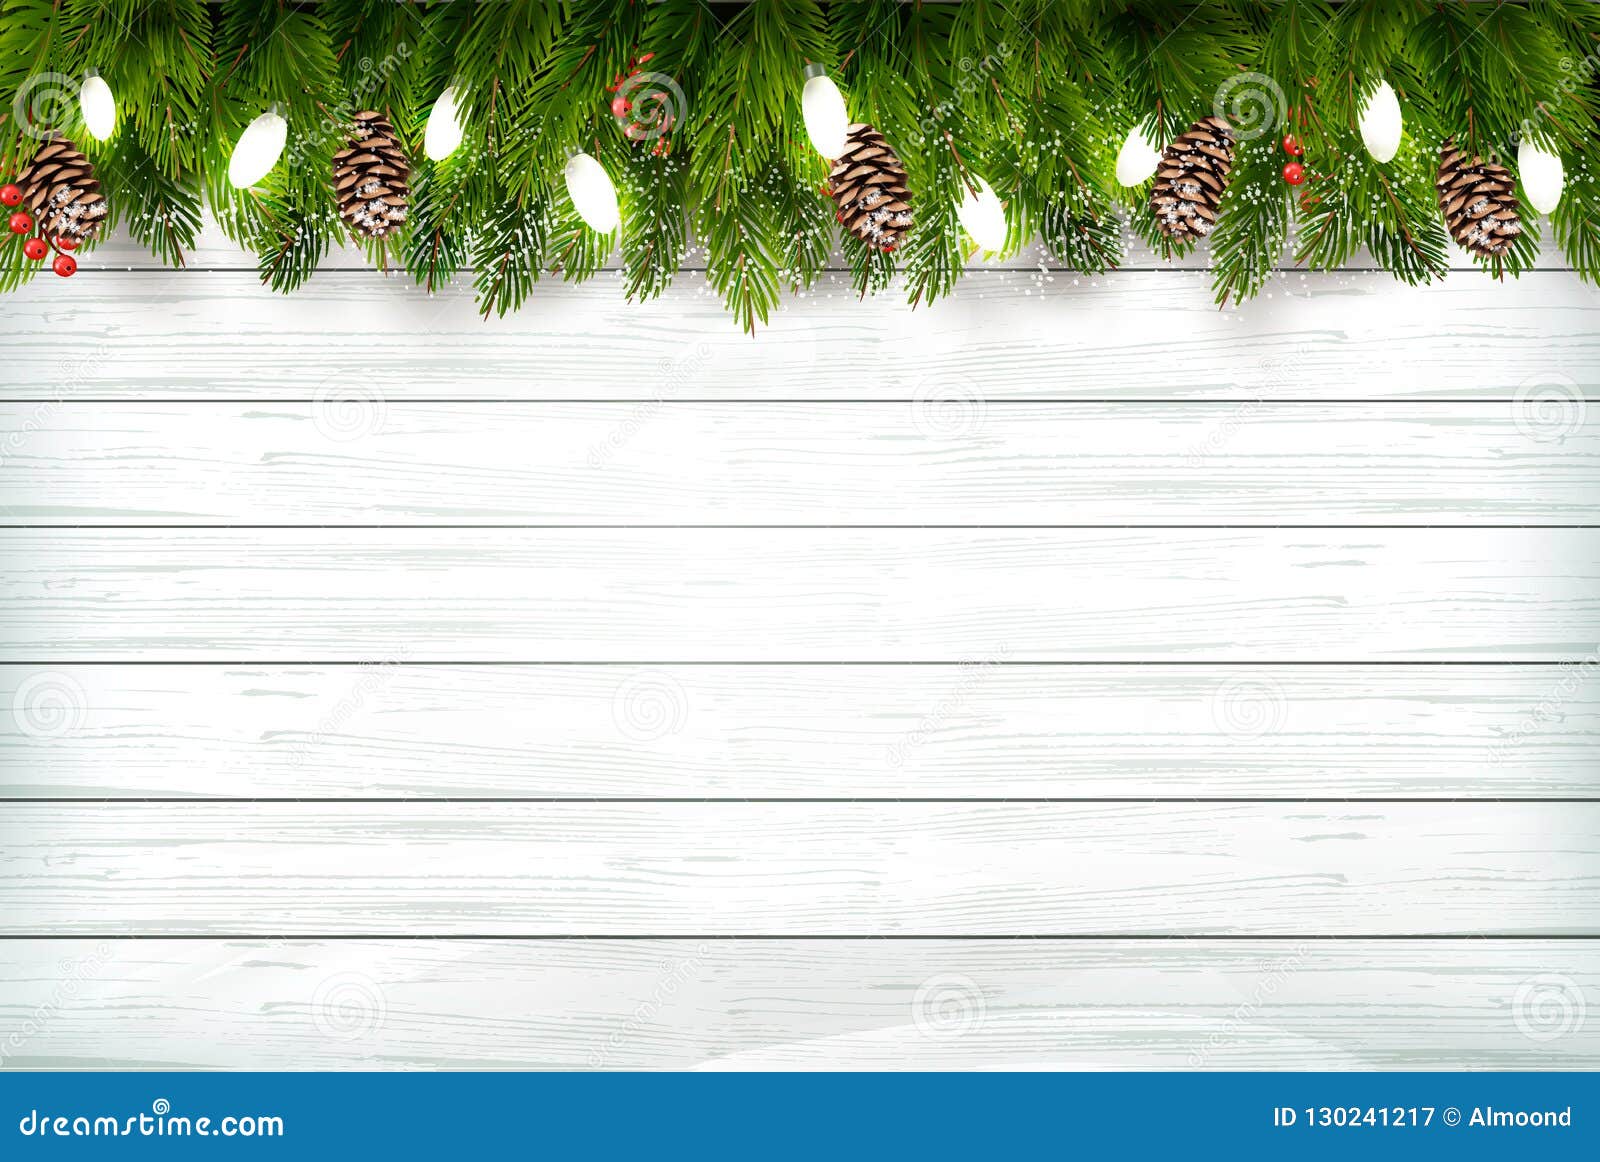 holiday christmas background with branch of tree and garland on